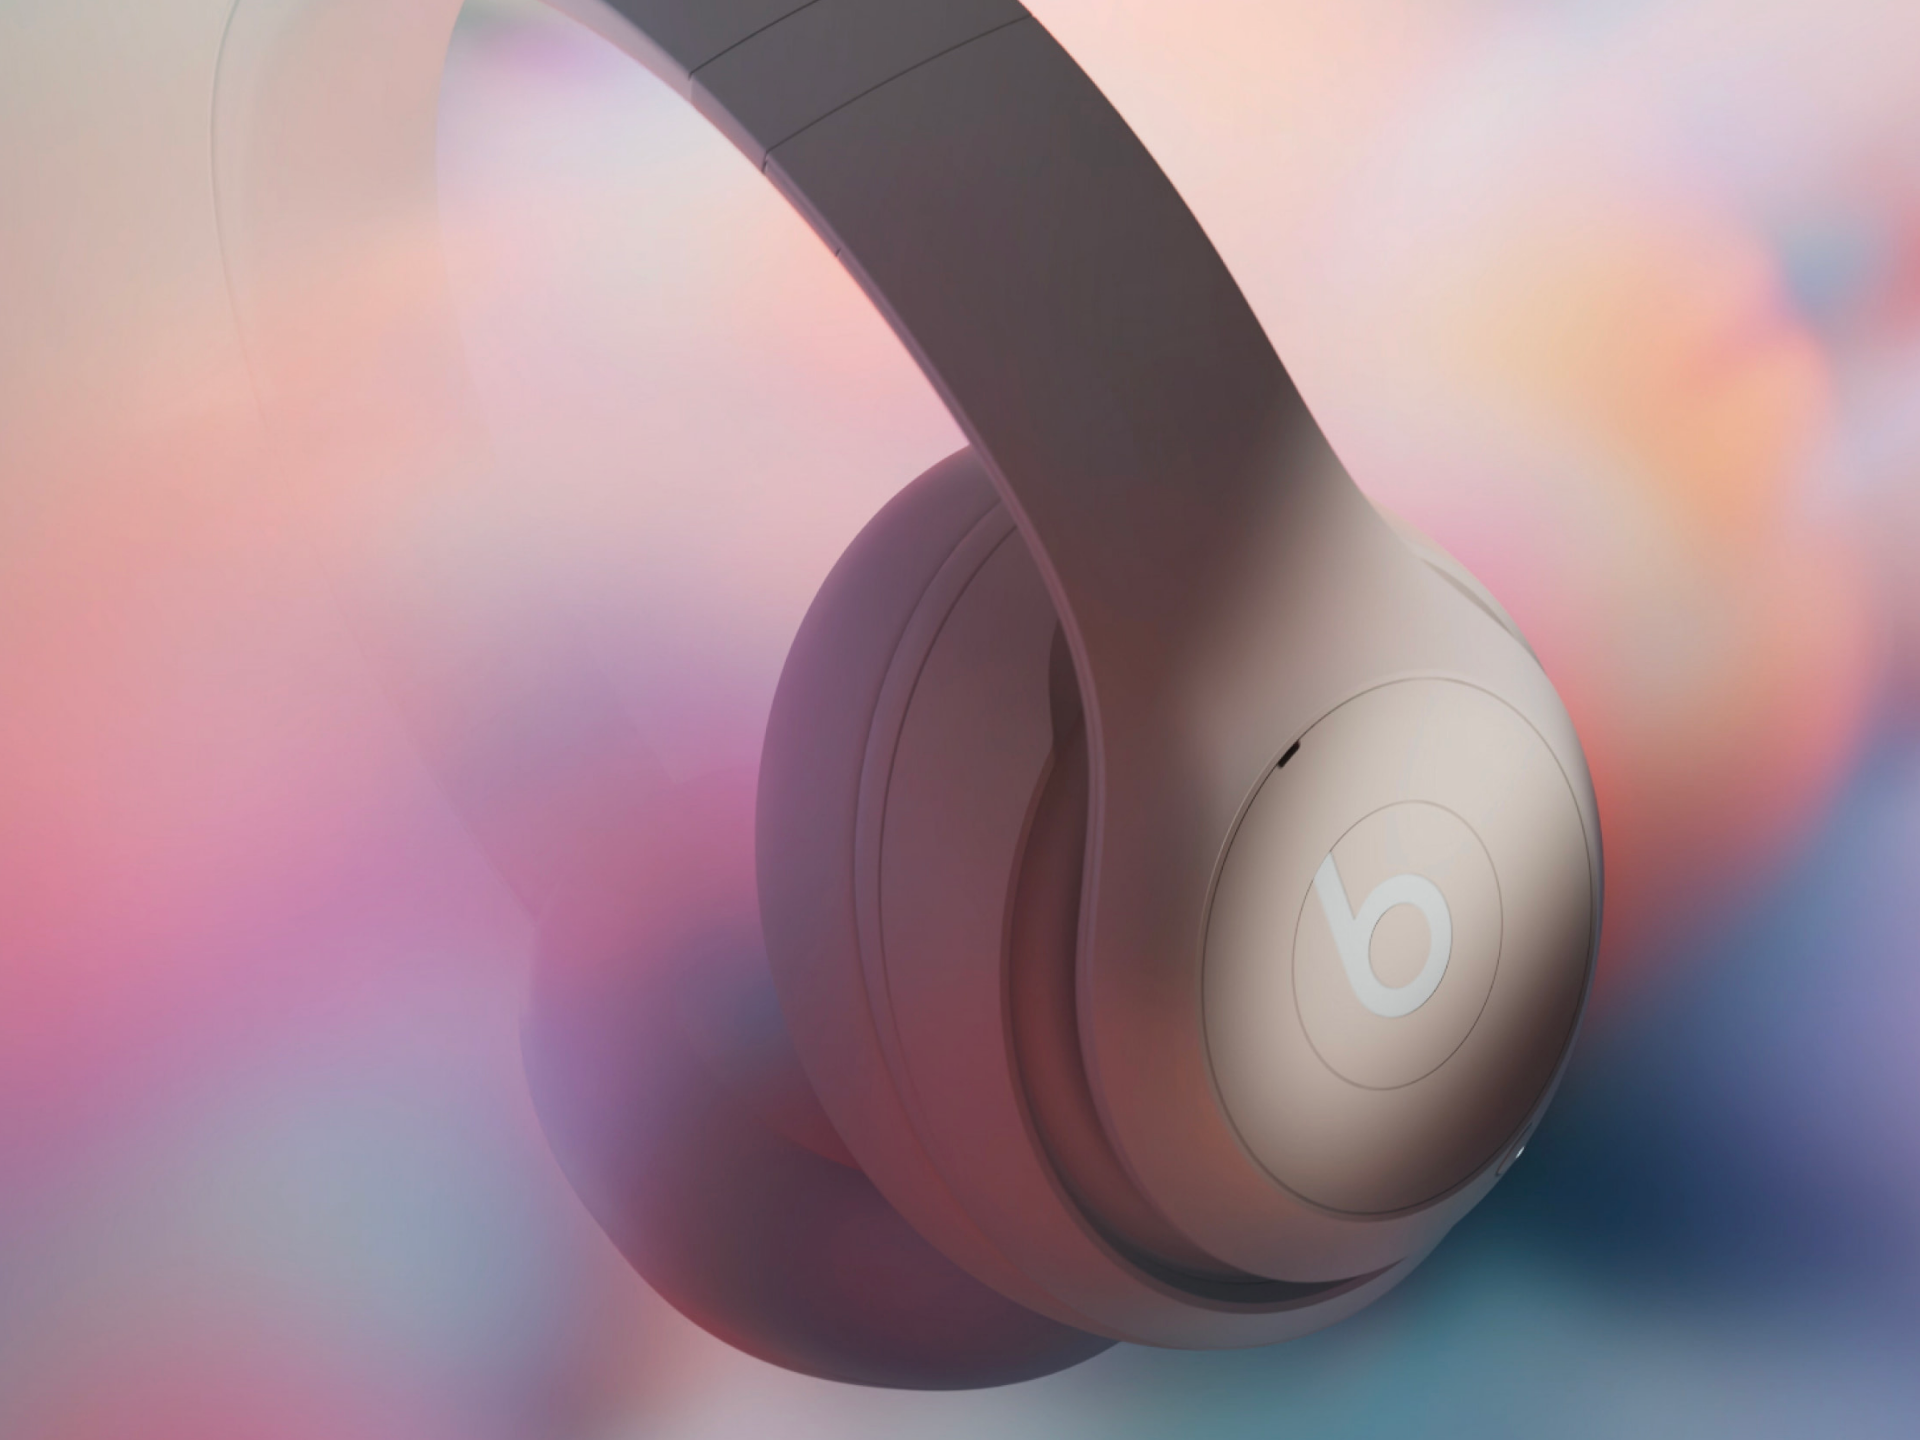 Beats Studio Pro are now available for 0 with 49% savings